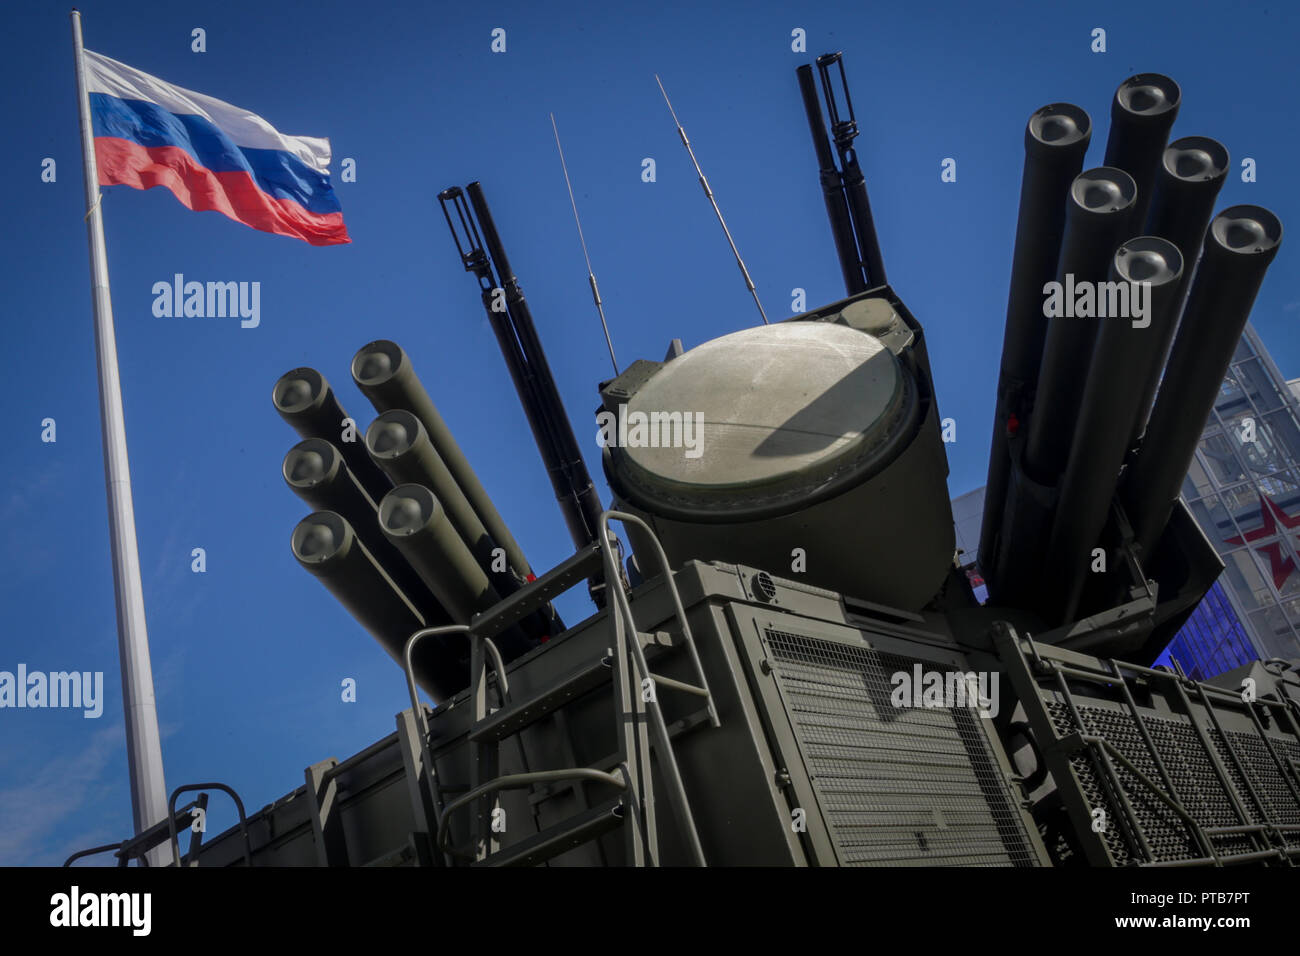 The Pantsir-S1 (SA-22), self-propelled, medium-range surface-to-air missile system seen displayed under the Russian national flag during the annual Army defense technology exhibition. Stock Photo